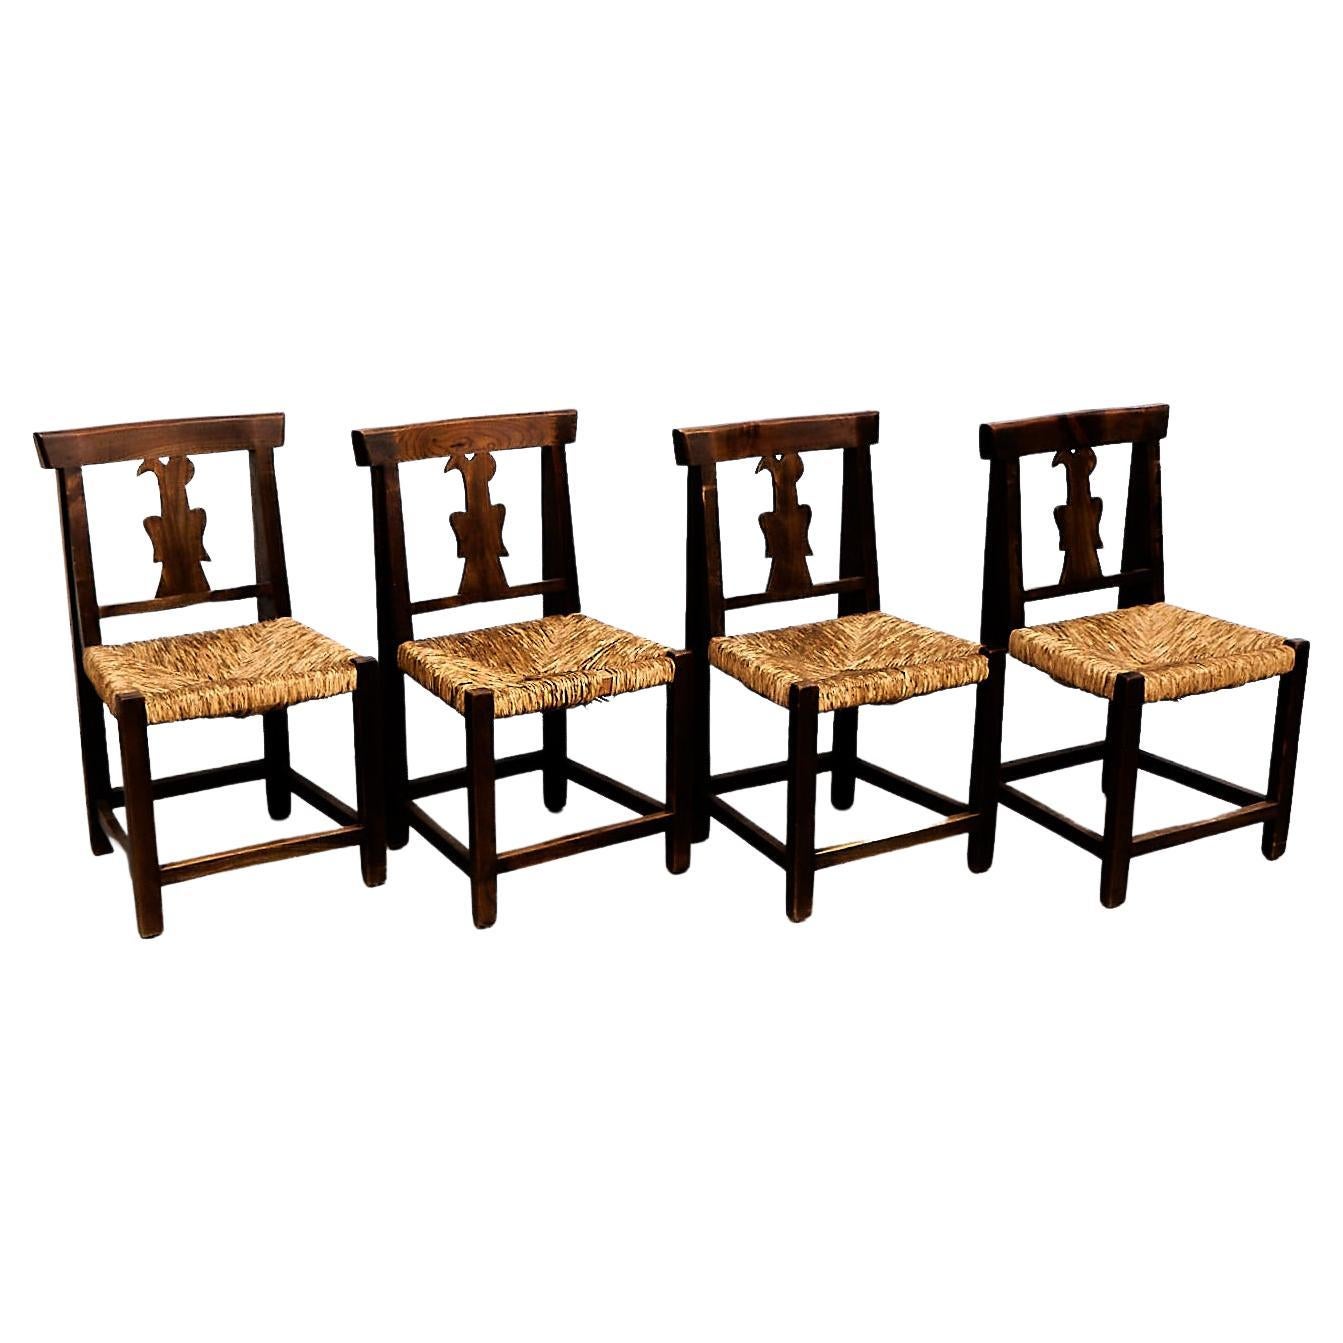 Set of Four Rustic Wood French Chairs, circa 1950